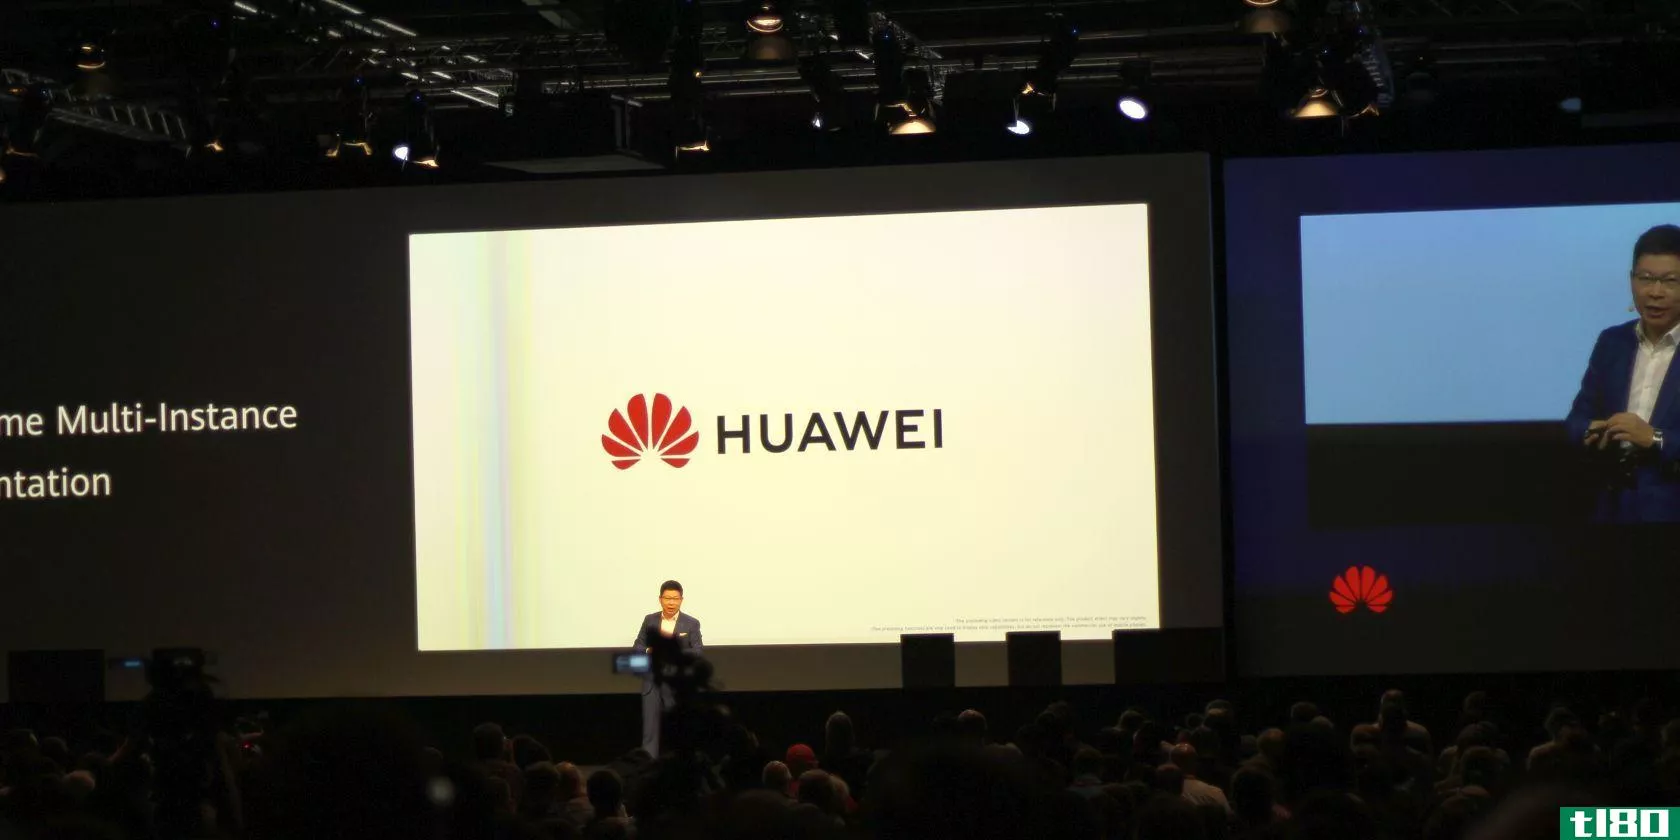 This is an image of Huawei's logo which was displayed at IFA 2019 during a keynote speech